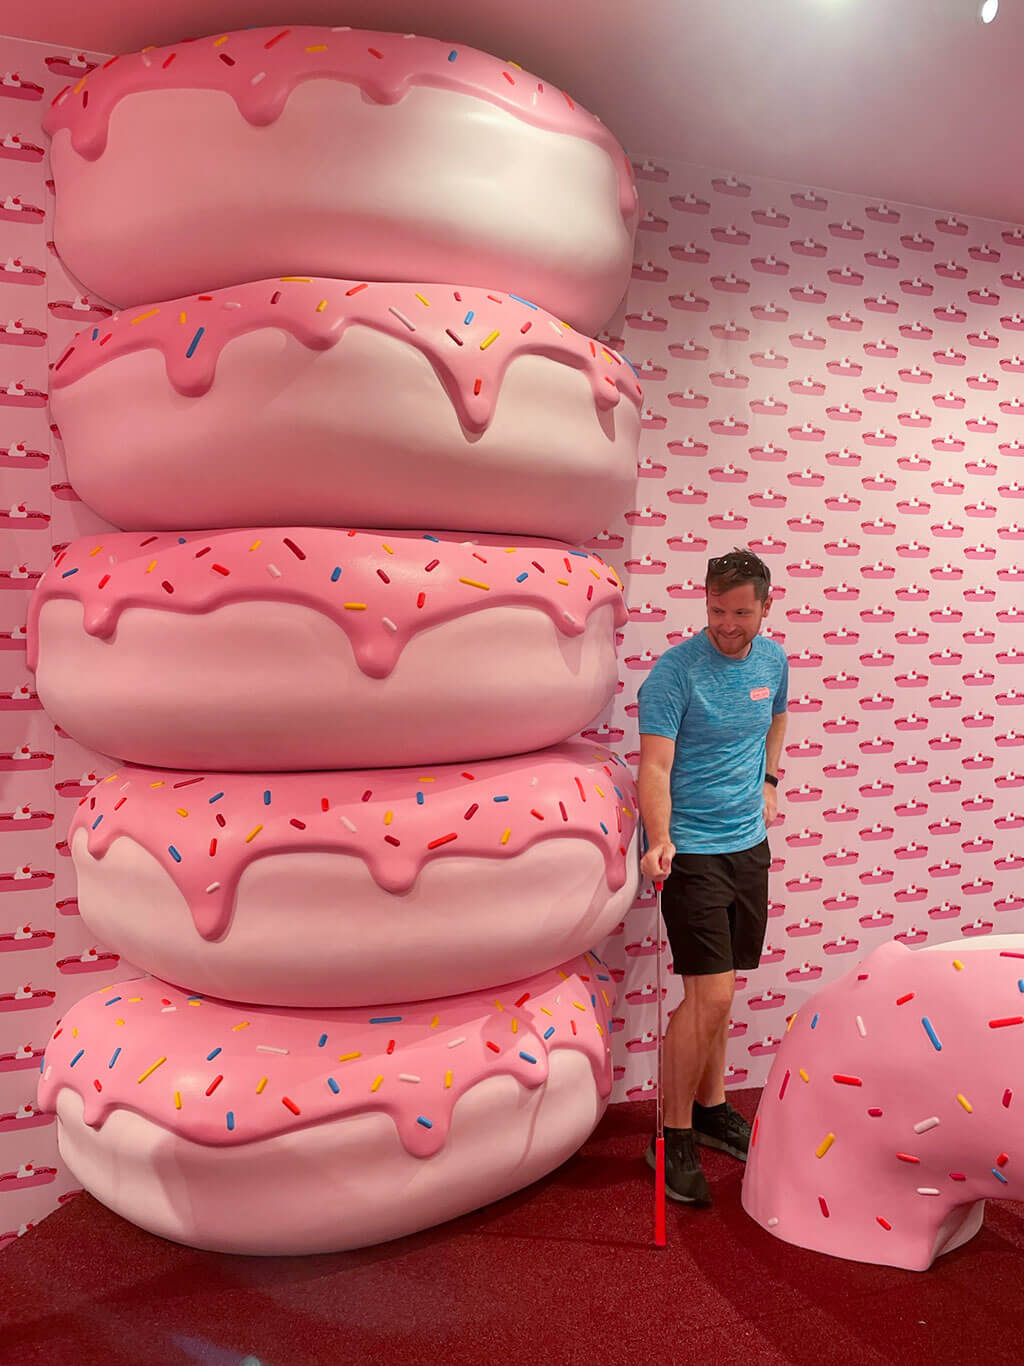 drive-swim-fly-chicago-museum-of-ice-cream-magnificent-mile-sweets-candy-dessert-treats-pink-donuts